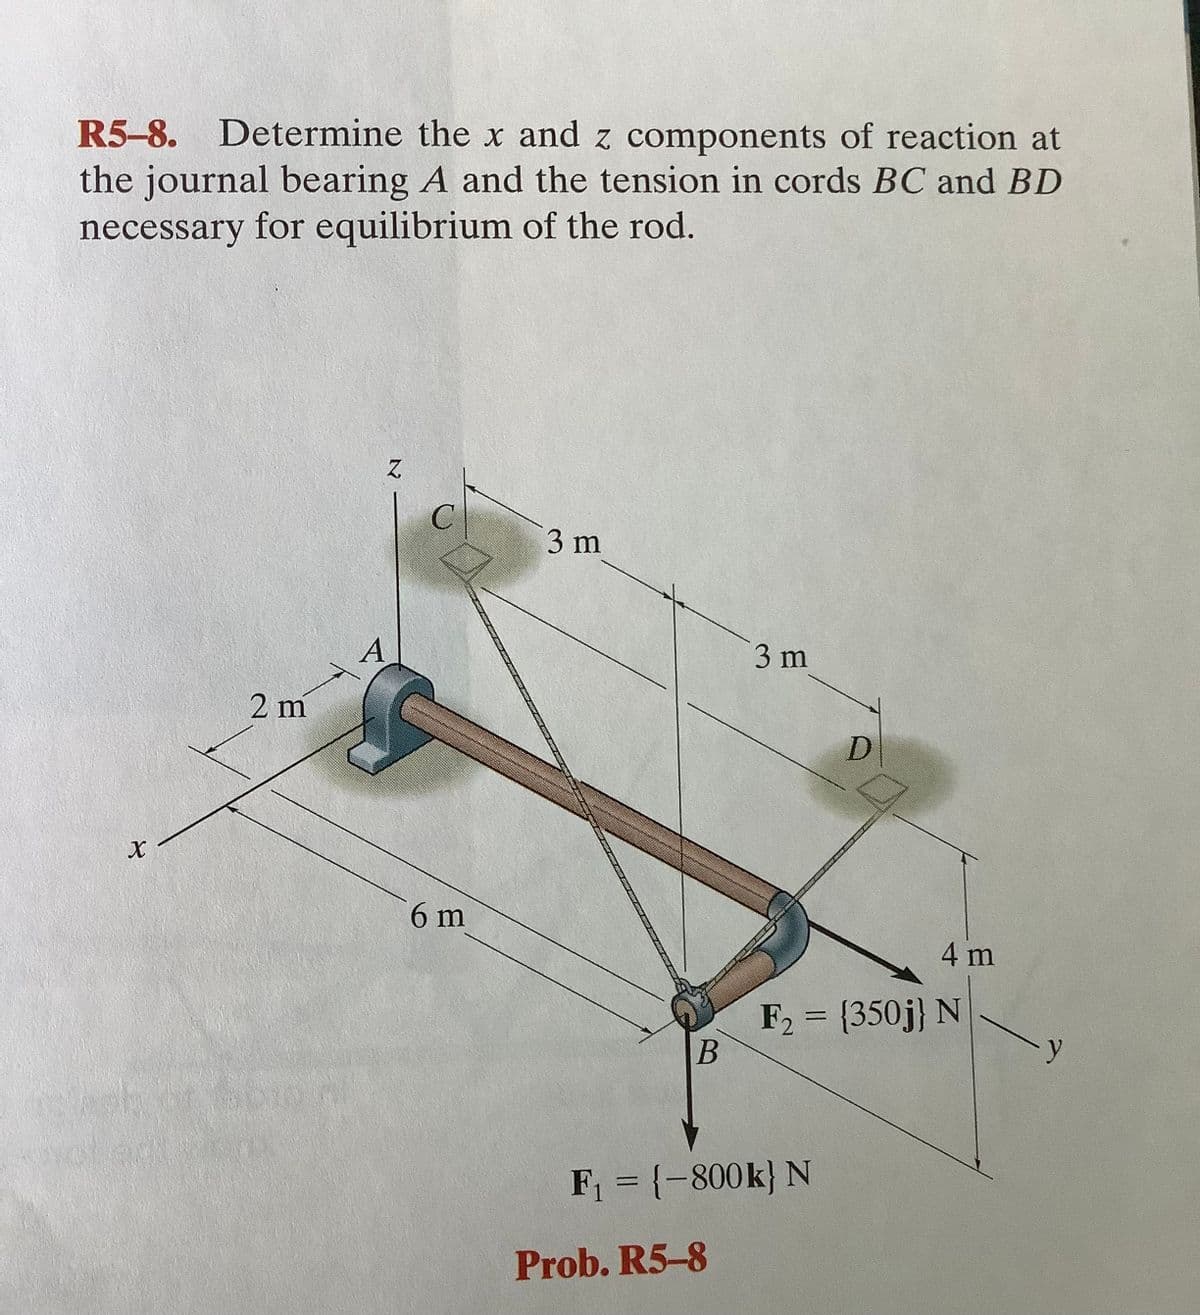 R5-8. Determine the x and z components of reaction at
the journal bearing A and the tension in cords BC and BD
necessary for equilibrium of the rod.
C
3 m
3 m
2 m
D
6 m
4 m
F, = {350j} N
%3D
F = {-800k} N
%3D
Prob. R5-8
